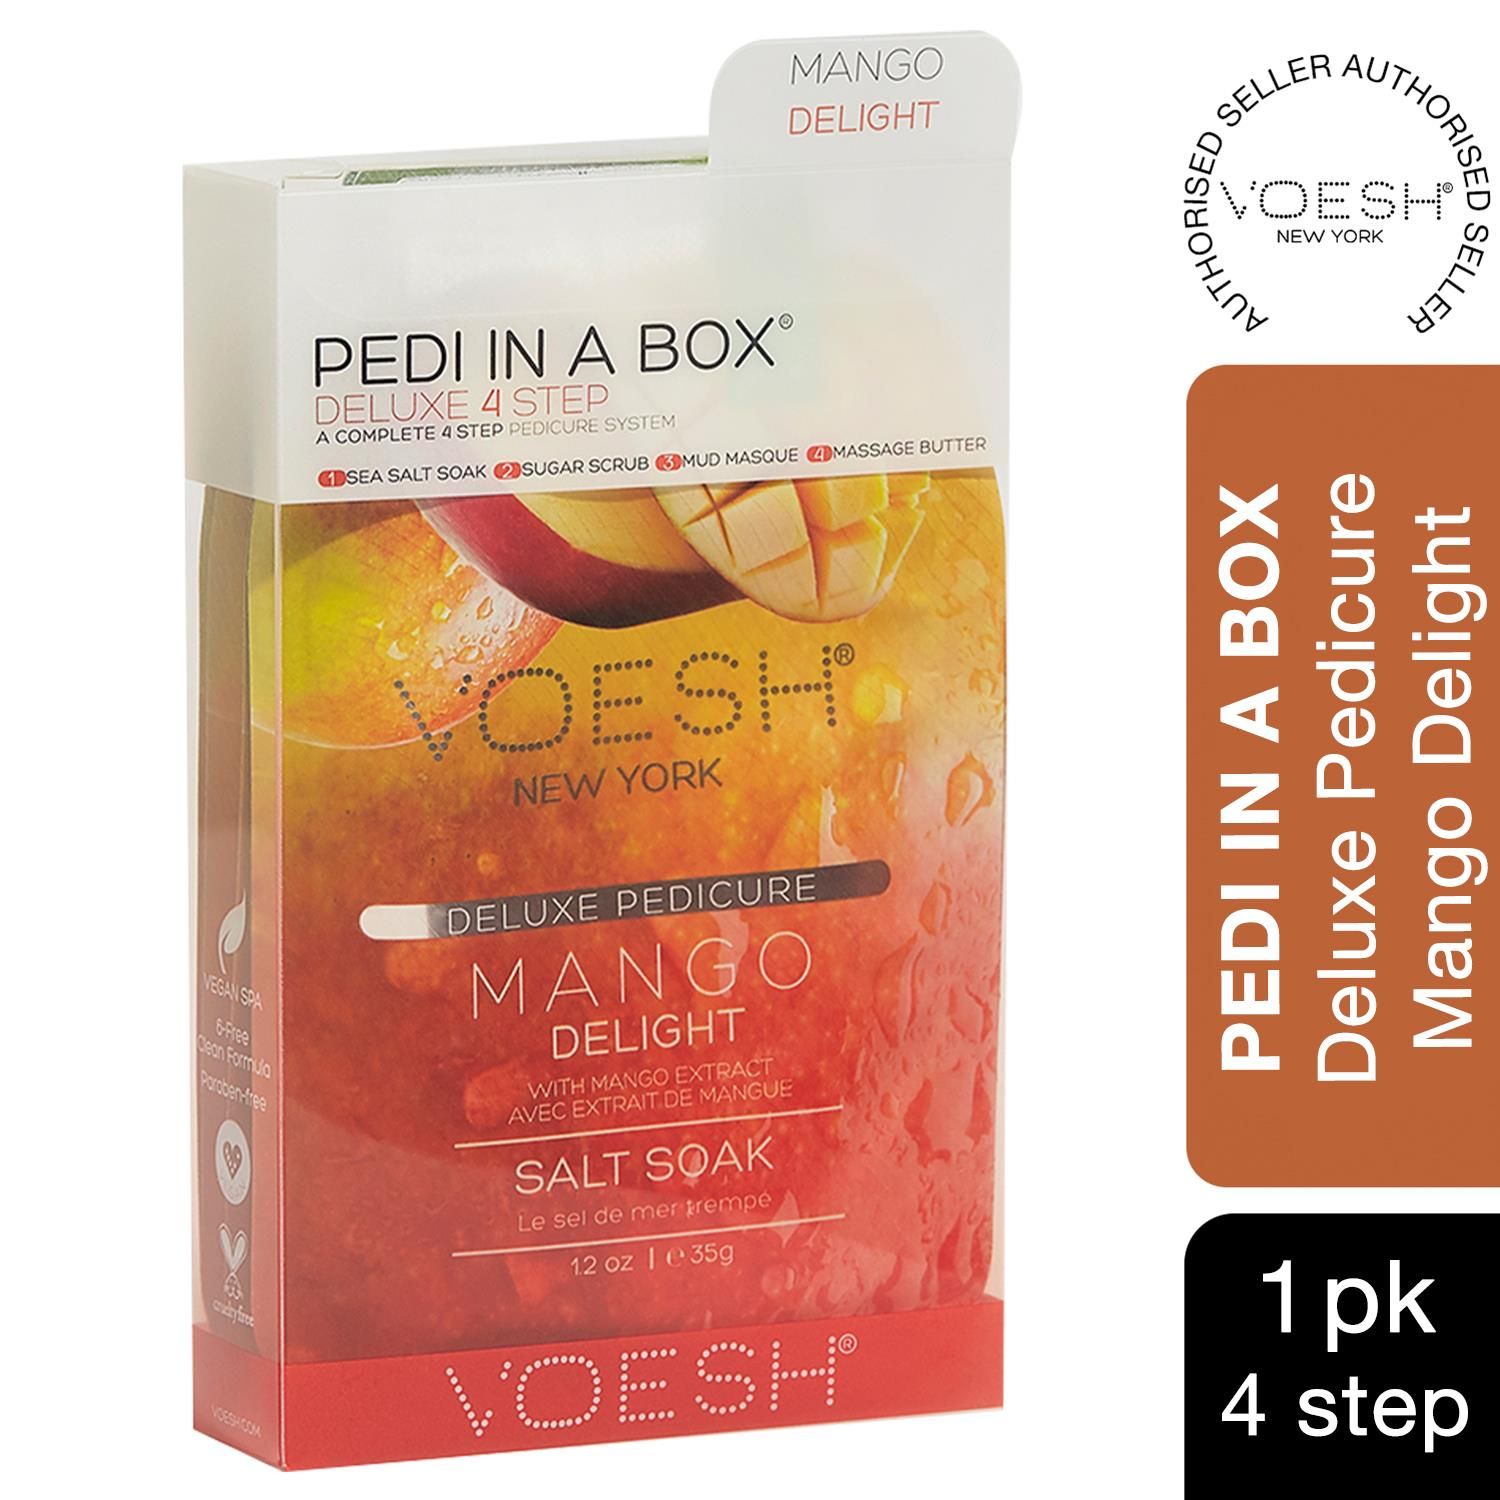 Voesh Mango Delight Deluxe 4 Step Pedicure In A Box with Mango Extract.  The Cleanest And Most Hygienic Spa Pedicure Solution. Enriched With Key Ingredients To Give Your Feet The Nutrition It Needs. Each Product Is Individually Packed With The Right Amount For A Single Pedicure.

The Perfect Pedi For:
DIY At-Home Pedicure
Date Night
Bachelorette Parties
Girls’ Night In

The kit contains:
Sea Salt Soak: This soak helps relieve tension, stiffness, minor aches and discomfort in your feet. It helps detox and deodorize the feet.
Sugar Scrub: The scrub gently exfoliates dead skin cells and helps soften your feet. Perfect for use on the soles on your feet.
Mud Masque: The masque removes deep-seated impurities in your skin leaving your feet feeling clean and revived.
Massage Cream: The massage cream hydrates and soothes skin. It softens the soles of your feet and helps prevent dryness and roughness.

4 Step Includes
Sea Salt Soak 35g: to detox & deodorize the feet.
Sugar Scrub 35g: to gently exfoliate dead skin.
Mud Masque 35g: to deep cleanse impurities.
Massage Butter 35g: to hydrate and soothe skin.